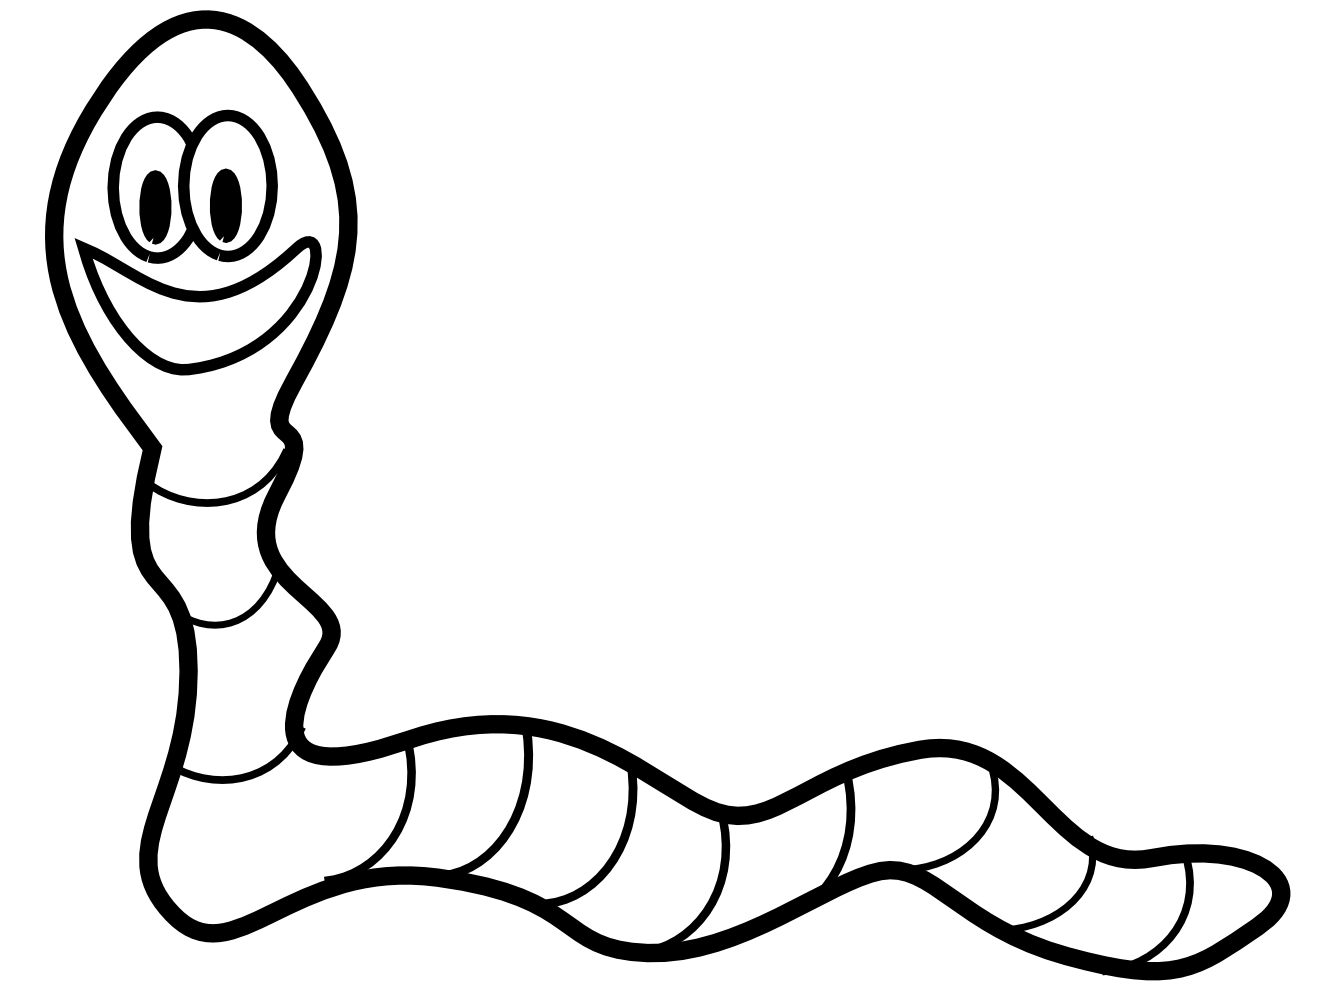 Worm clipart #10, Download drawings